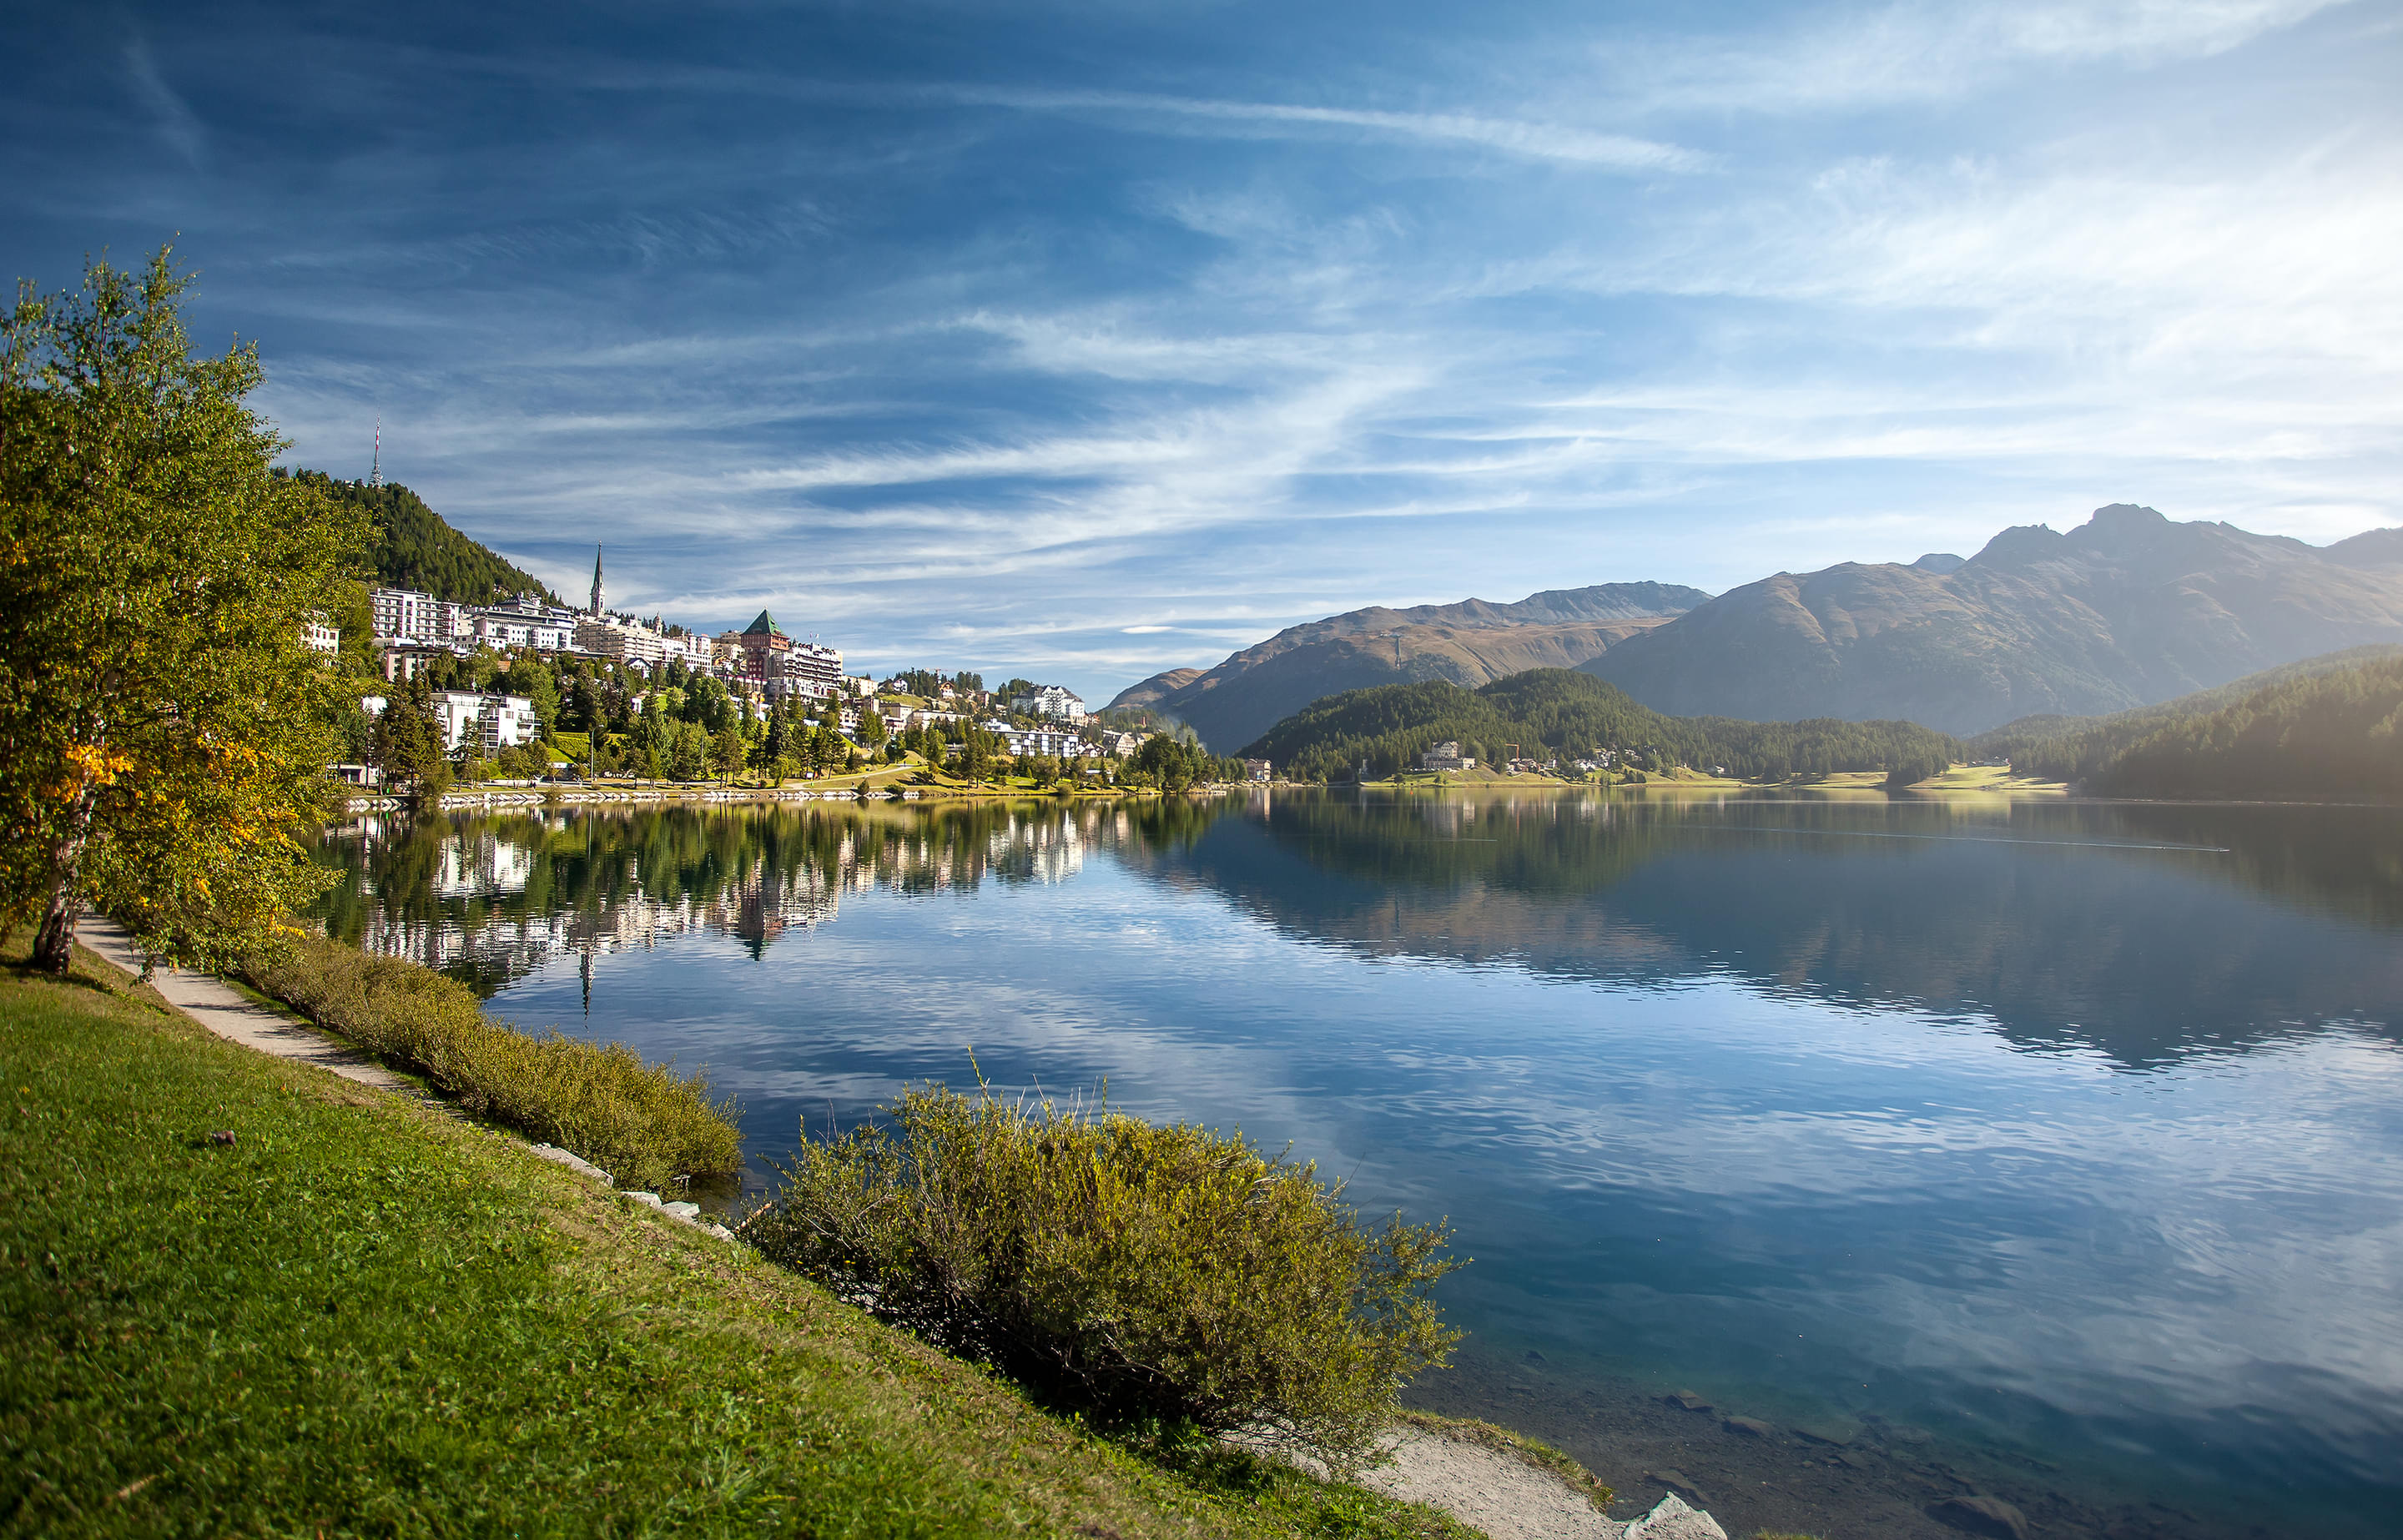 Things to Do in St. Moritz